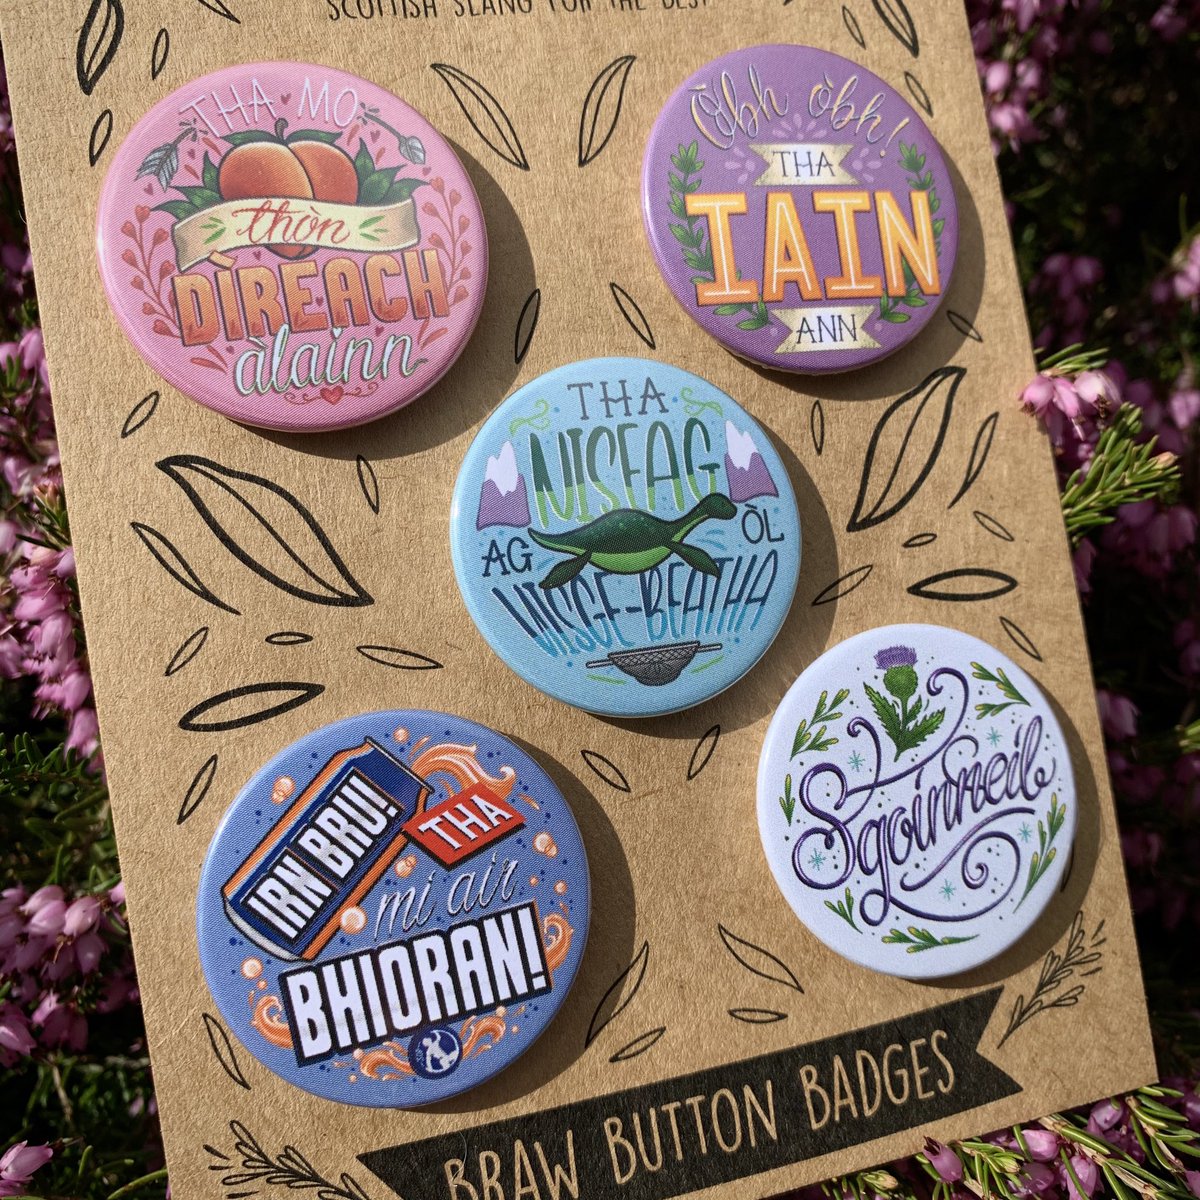 Here they are!  the whole reason my  @ScotsGaelicDuo illustrations were round! Haha! #gàidhlig button badges now available on my website!  (My actual website, not Redbubble this time)  http://www.puredeadbrilliantstore.com 